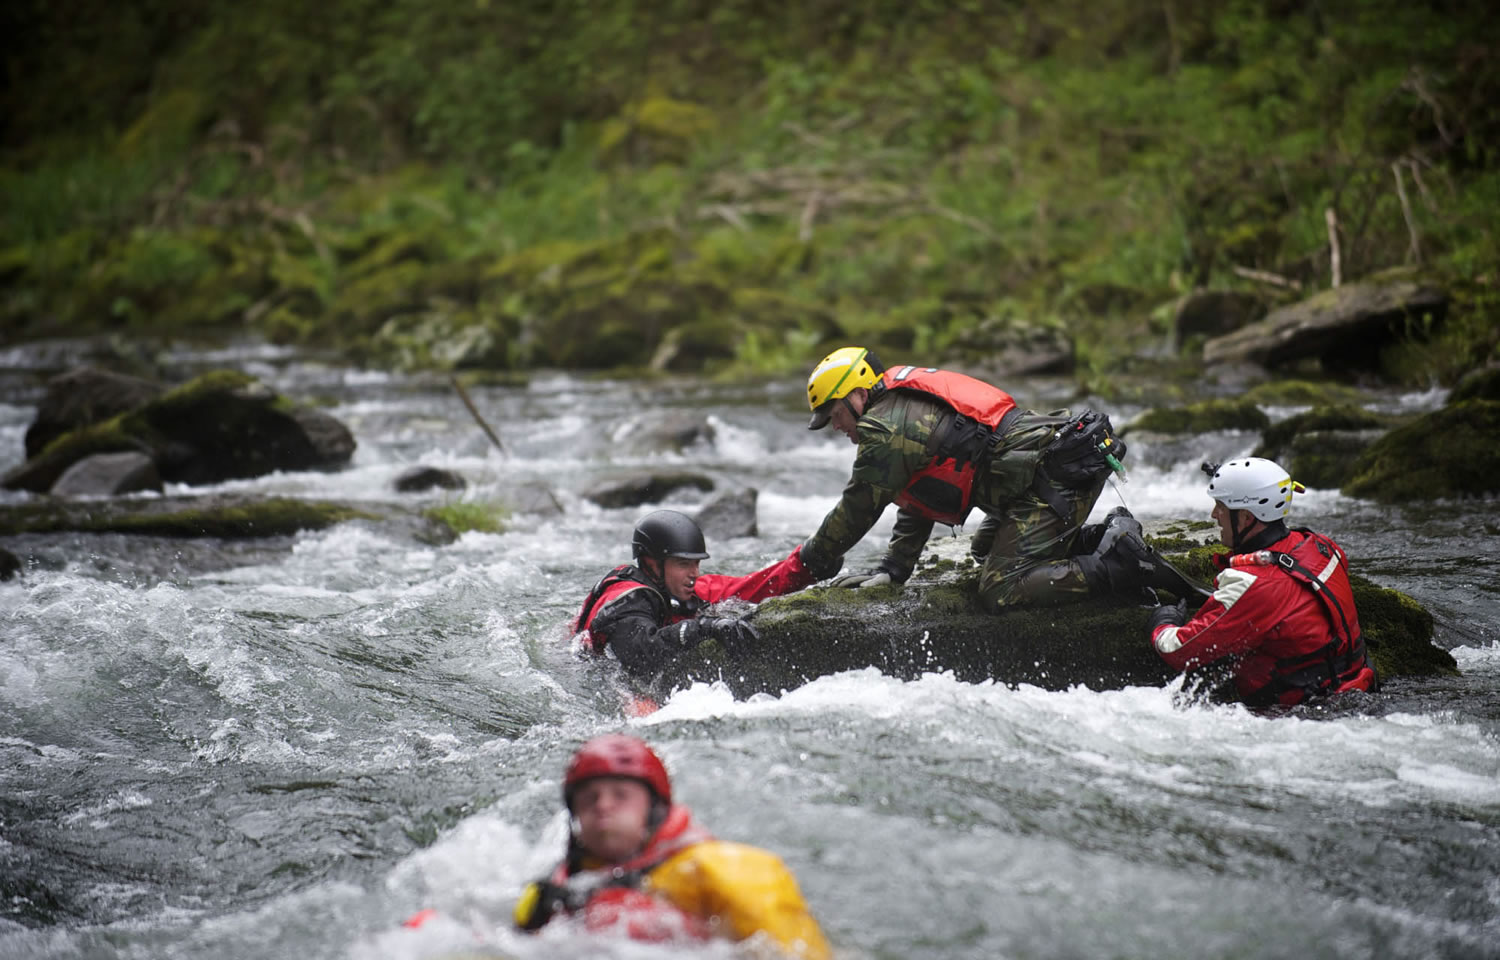 The Region 4 Technical Rescue team conducts water rescue drills at Big Eddy on the Washougal River on April 27.